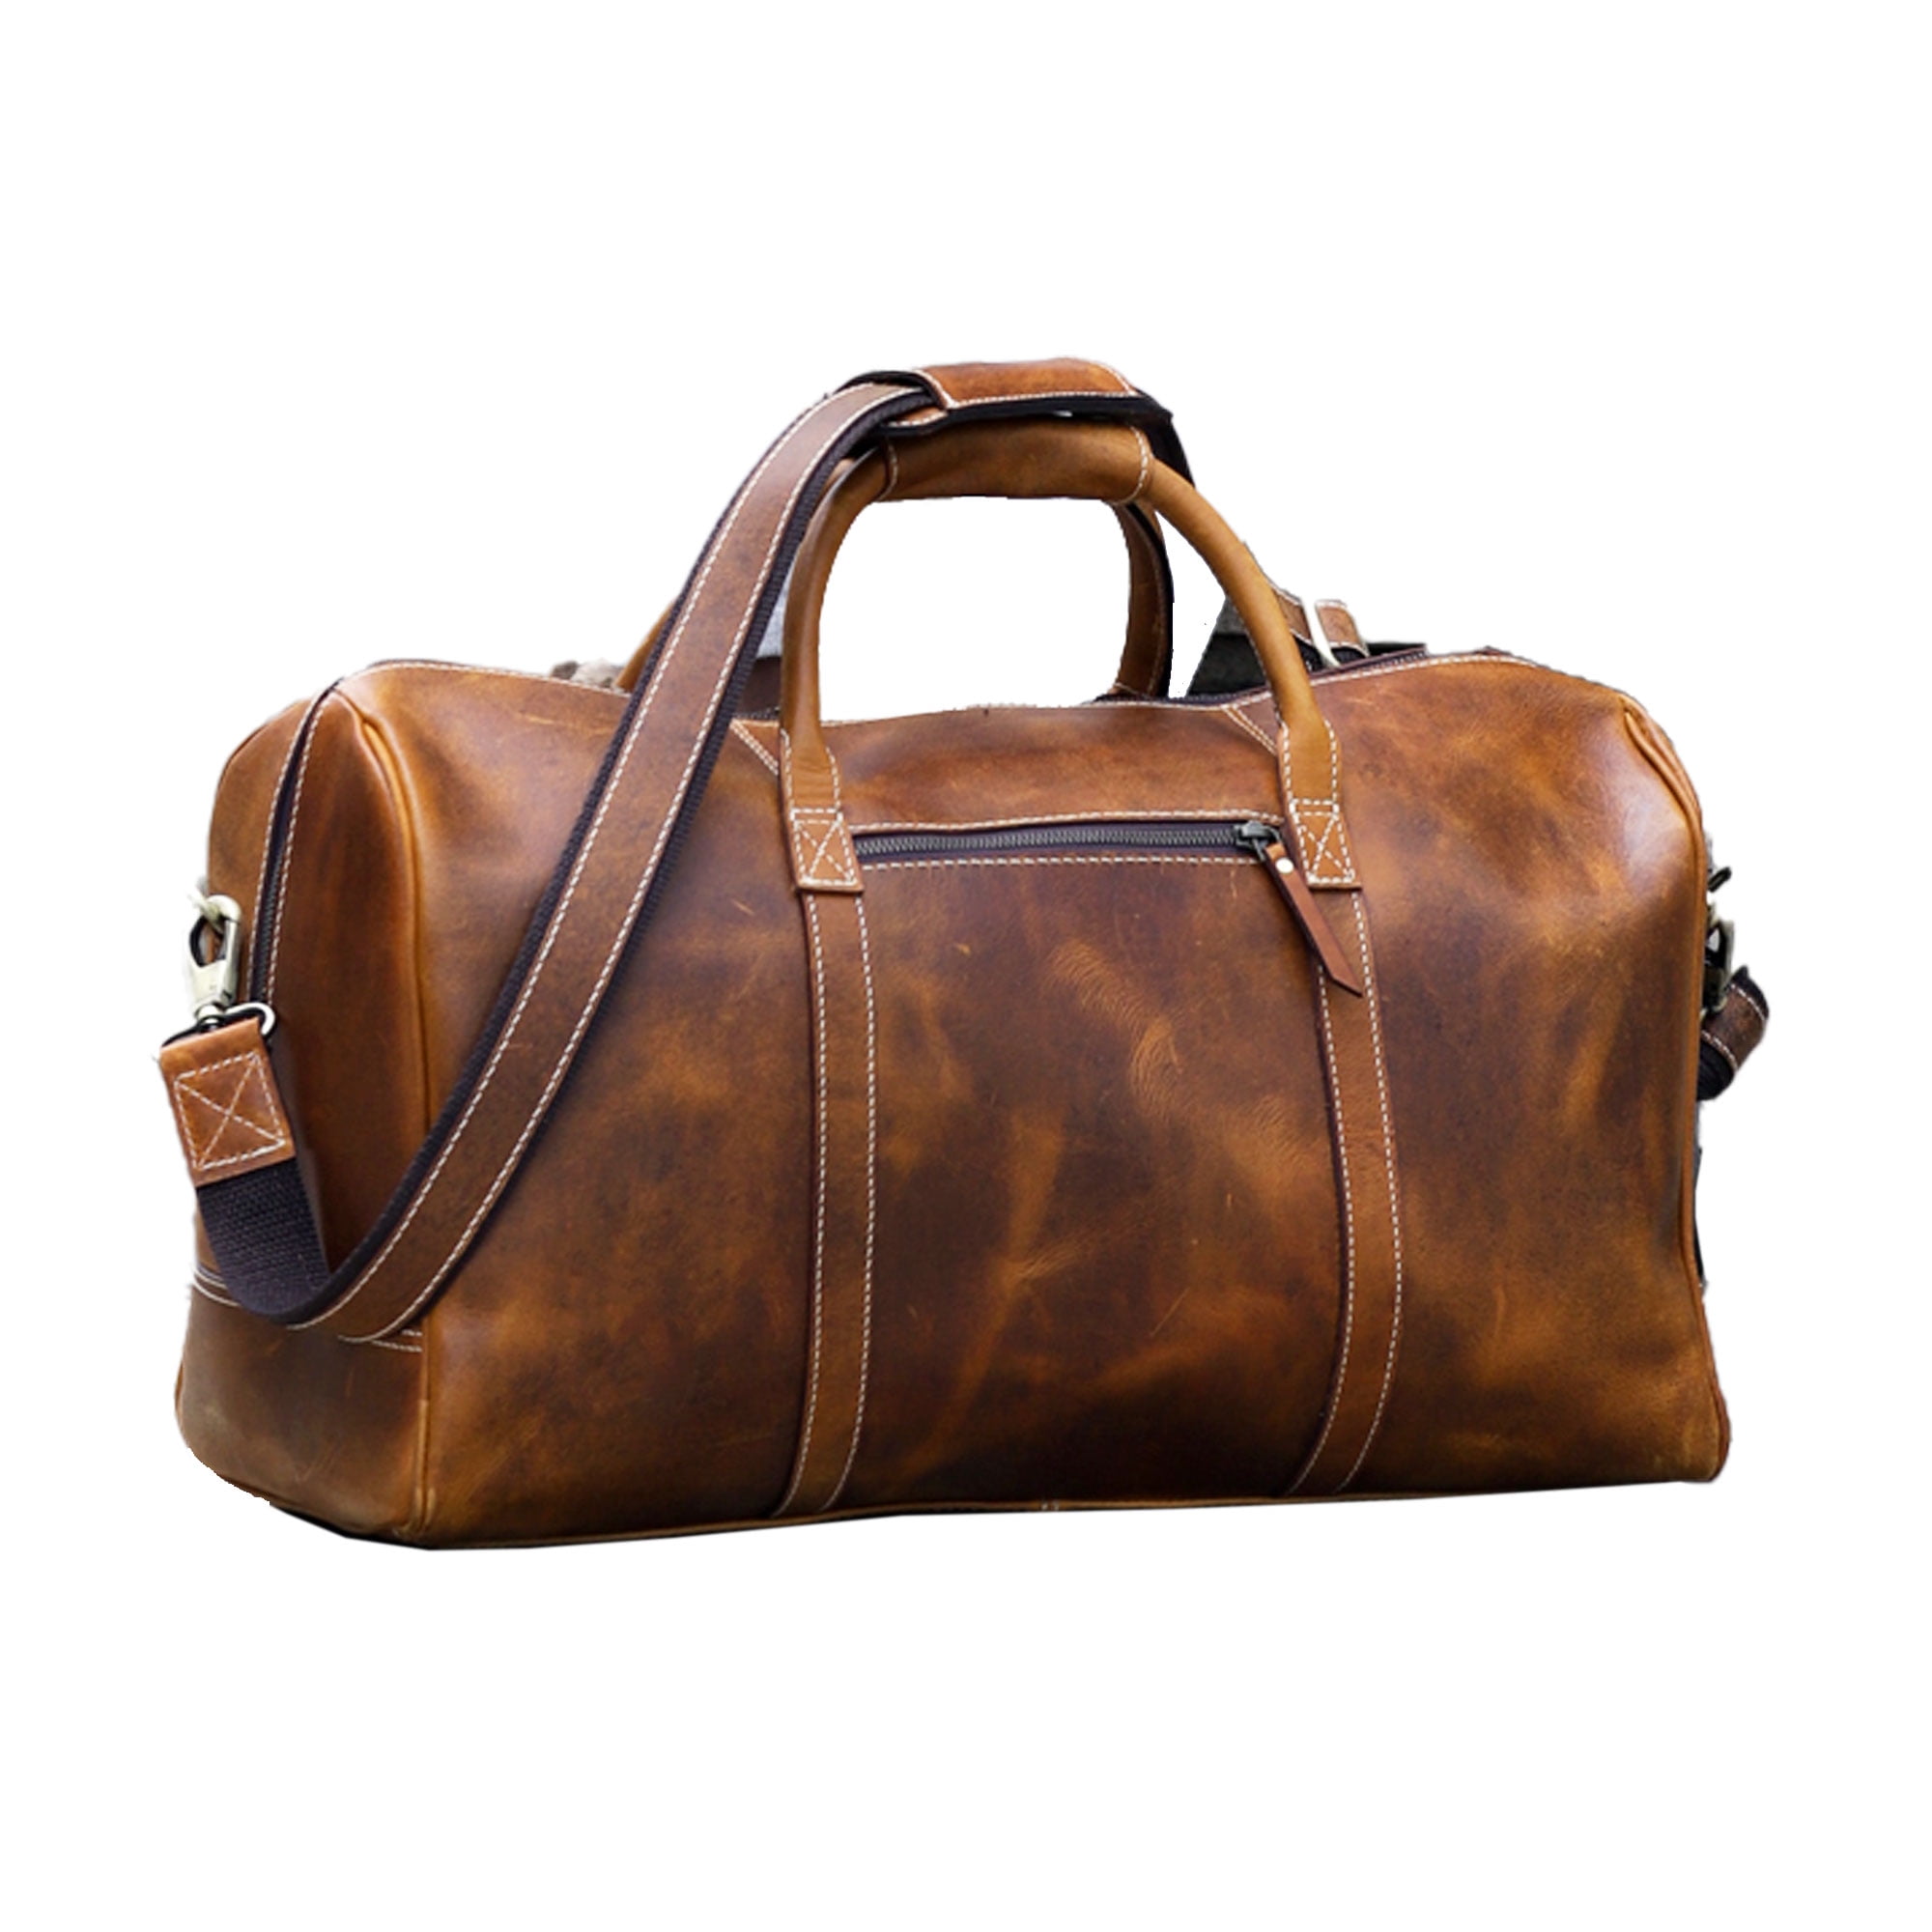 Leather Duffel Bag Travel Gym Sports Overnight Weekend cabin holdall by ...